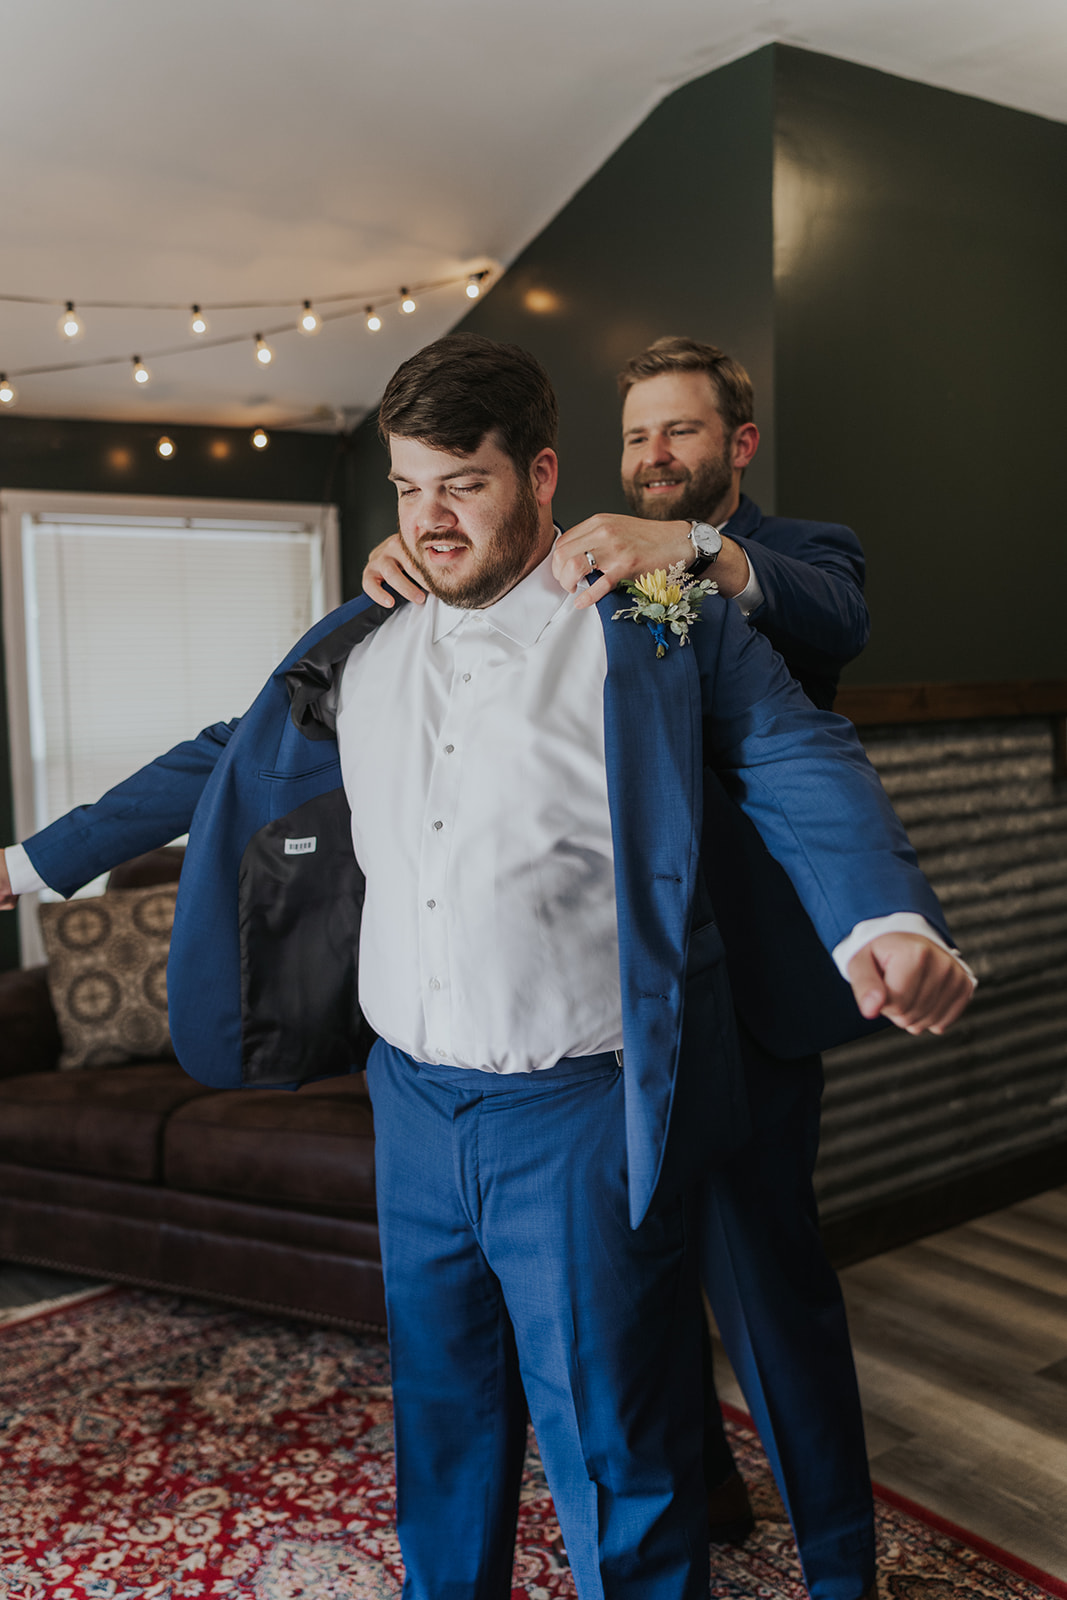 Best man helps the groom put his jacket on to finalize preparations for his wedding!